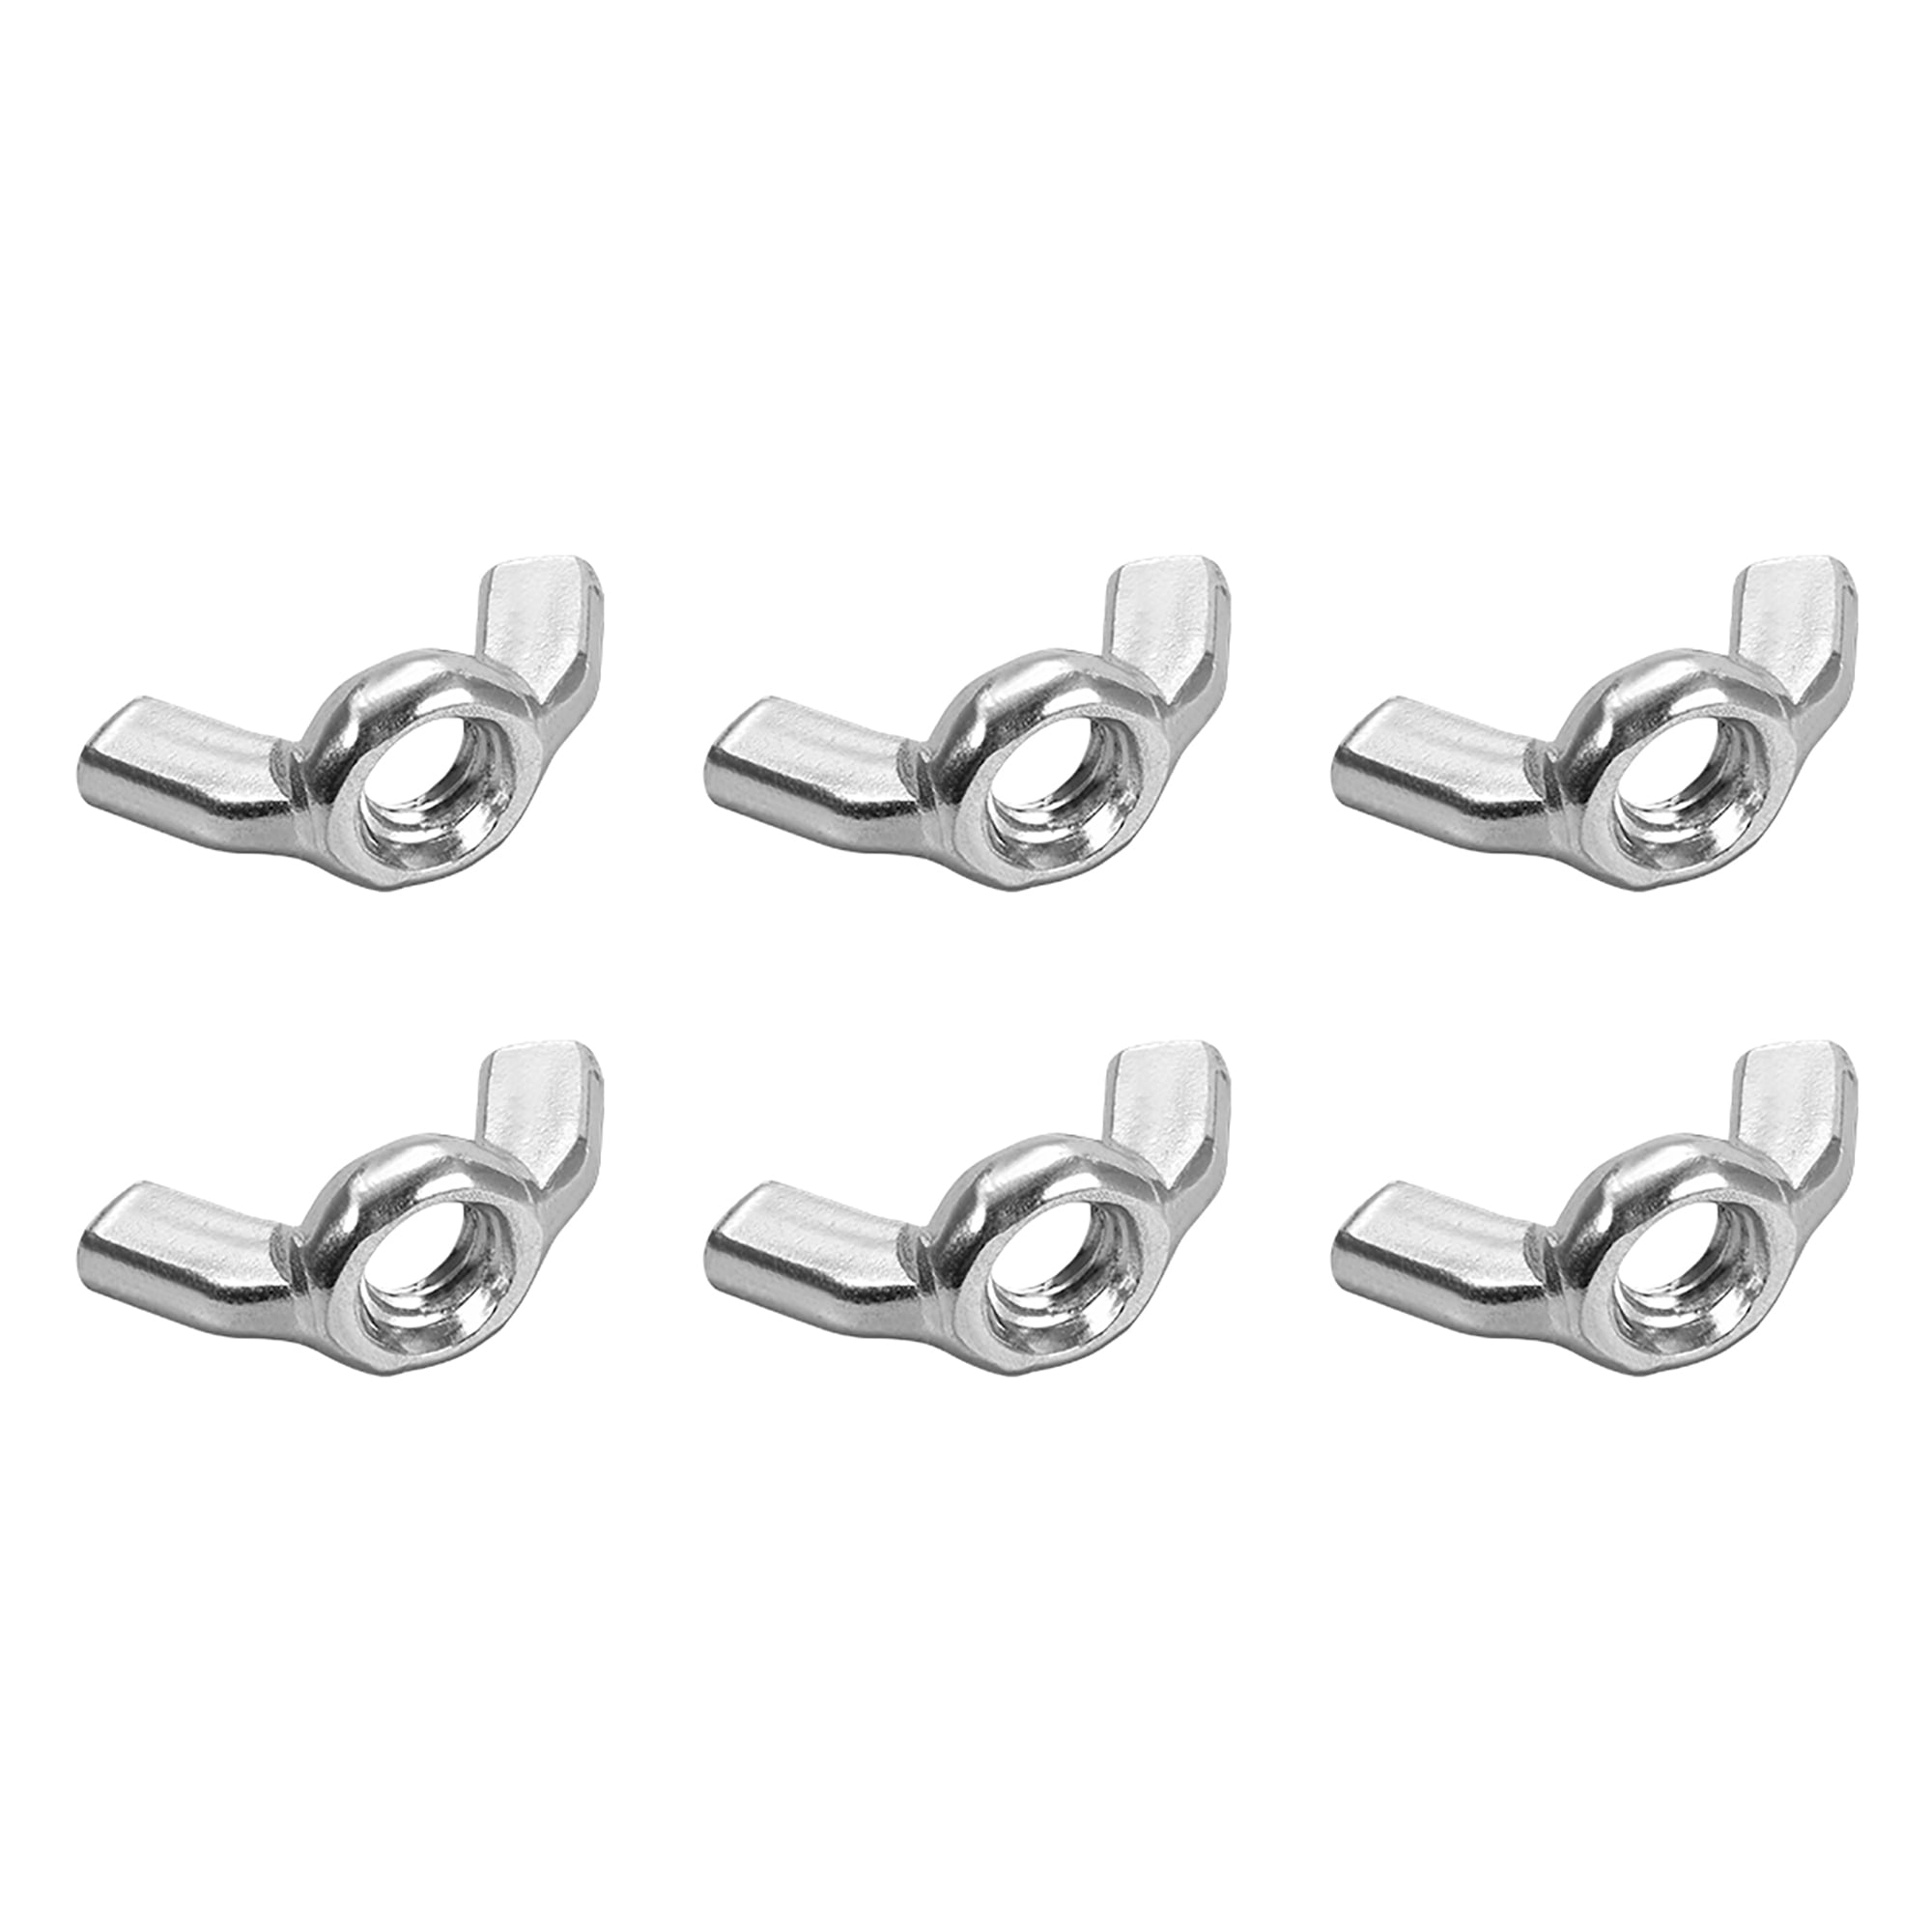 Carbon Steel Zinc Plated Hand Twist Tighten Ear Butterfly Nut for Furniture Decoration Yinpecly M6 Wing Nuts Silver 20 Pcs 